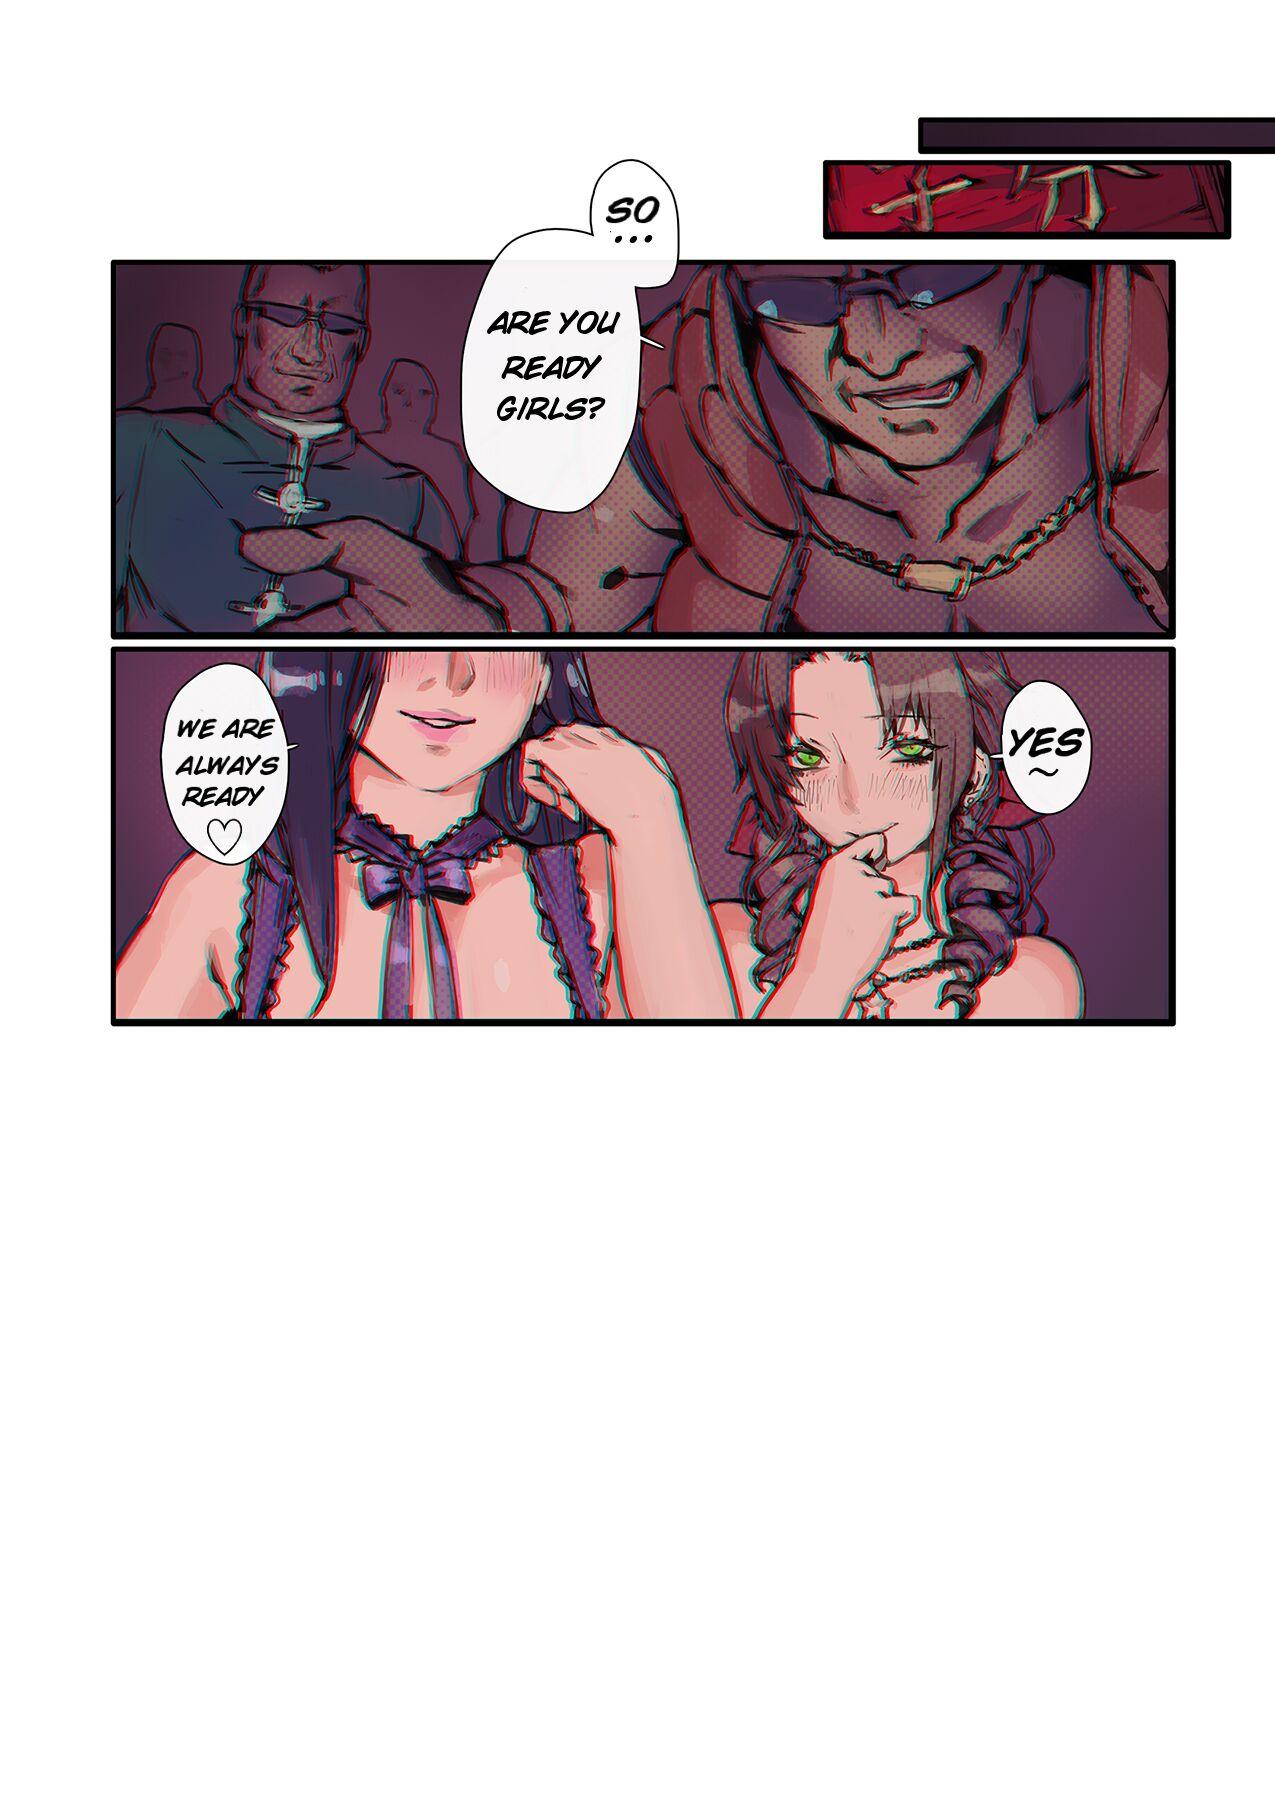 Italiana The Escort and the Flower Girl - Final fantasy vii Assfuck - Page 2